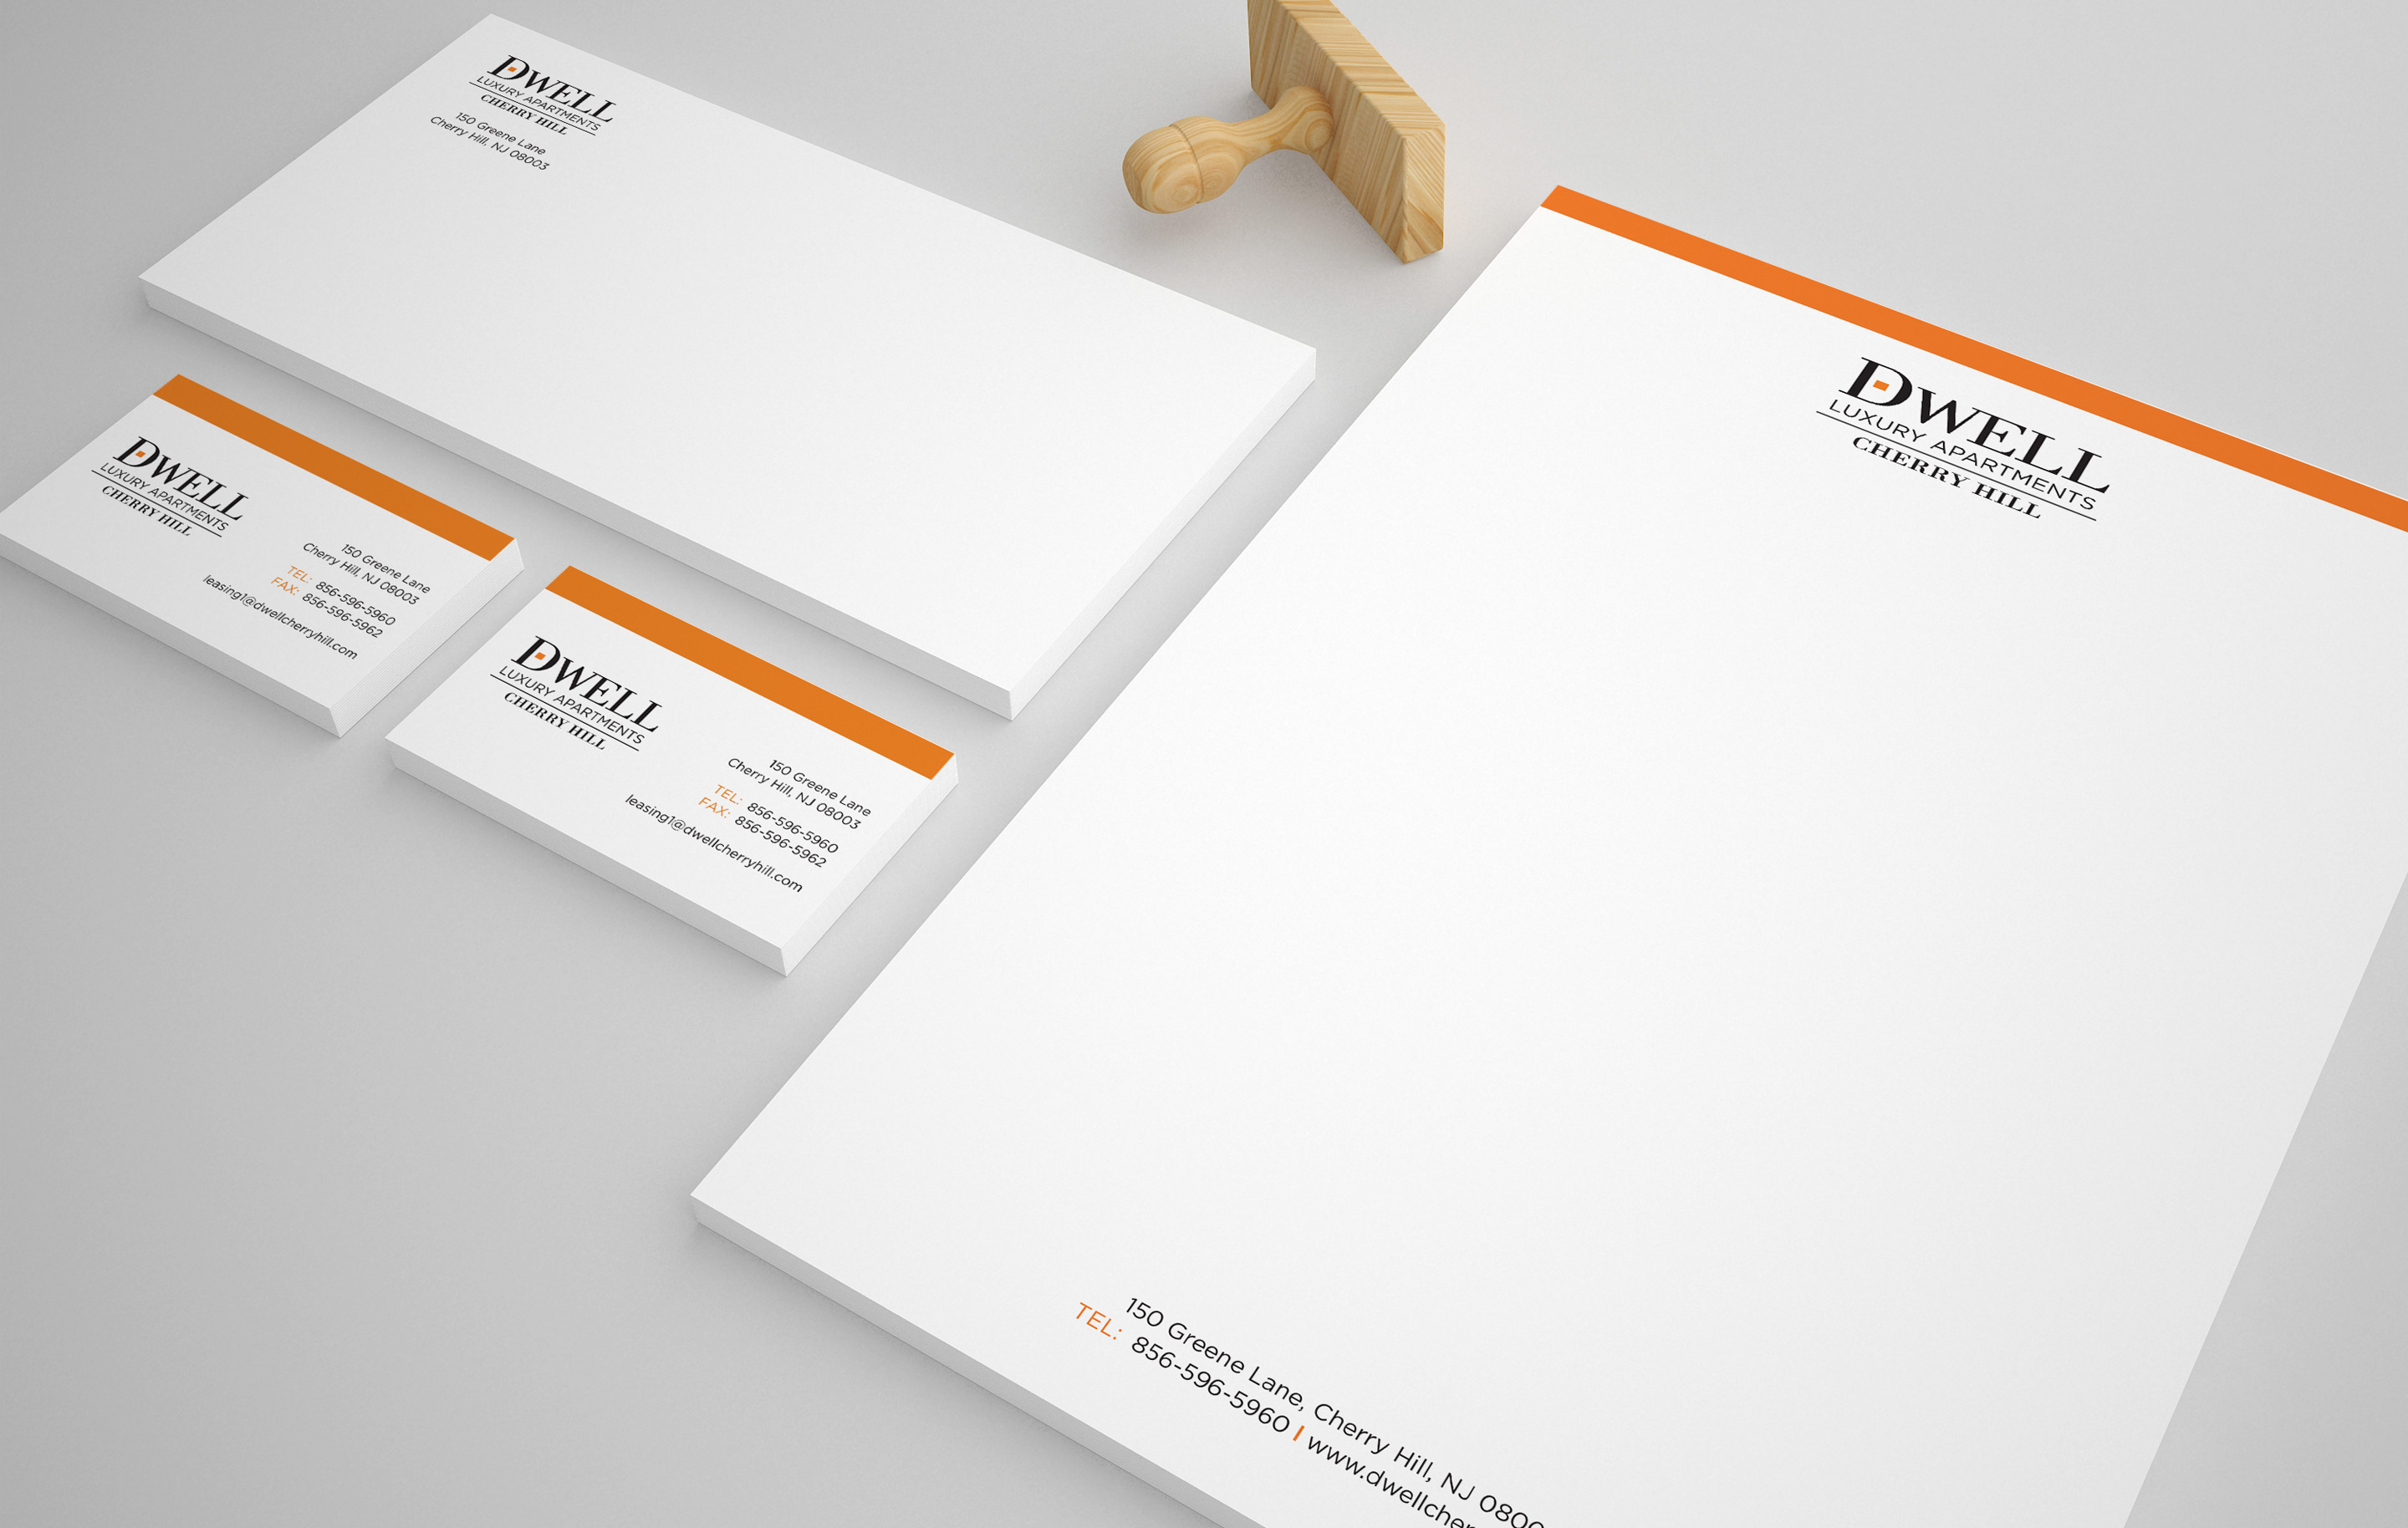 Dwell Cherry Hill Stationery design by advertising agency in Philadelphia